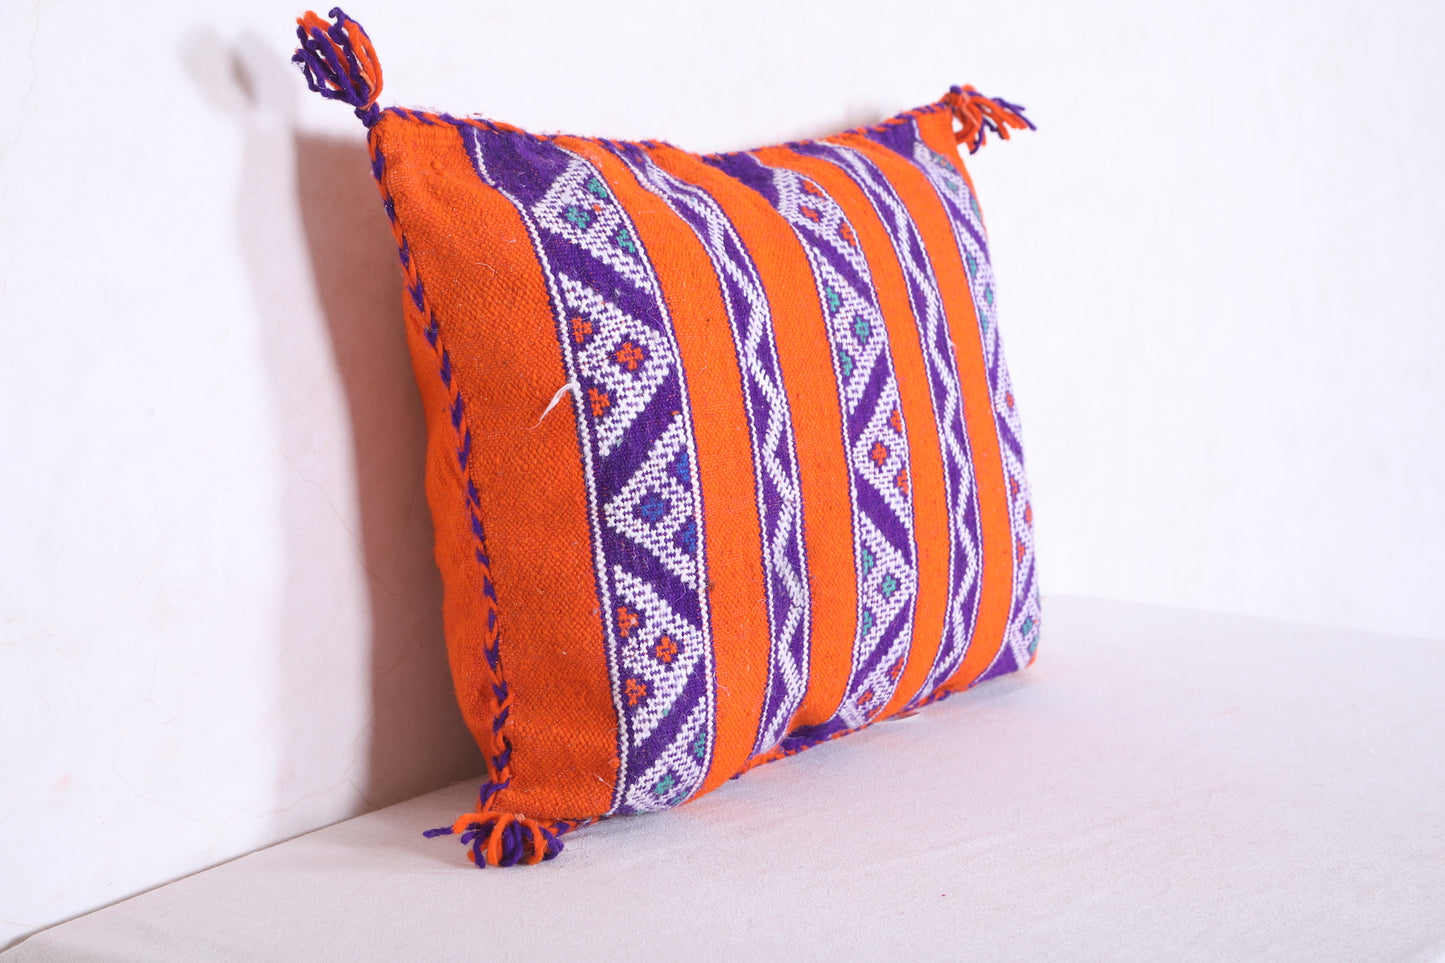 Moroccan handmade kilim pillow 18.8 INCHES X 23.6 INCHES